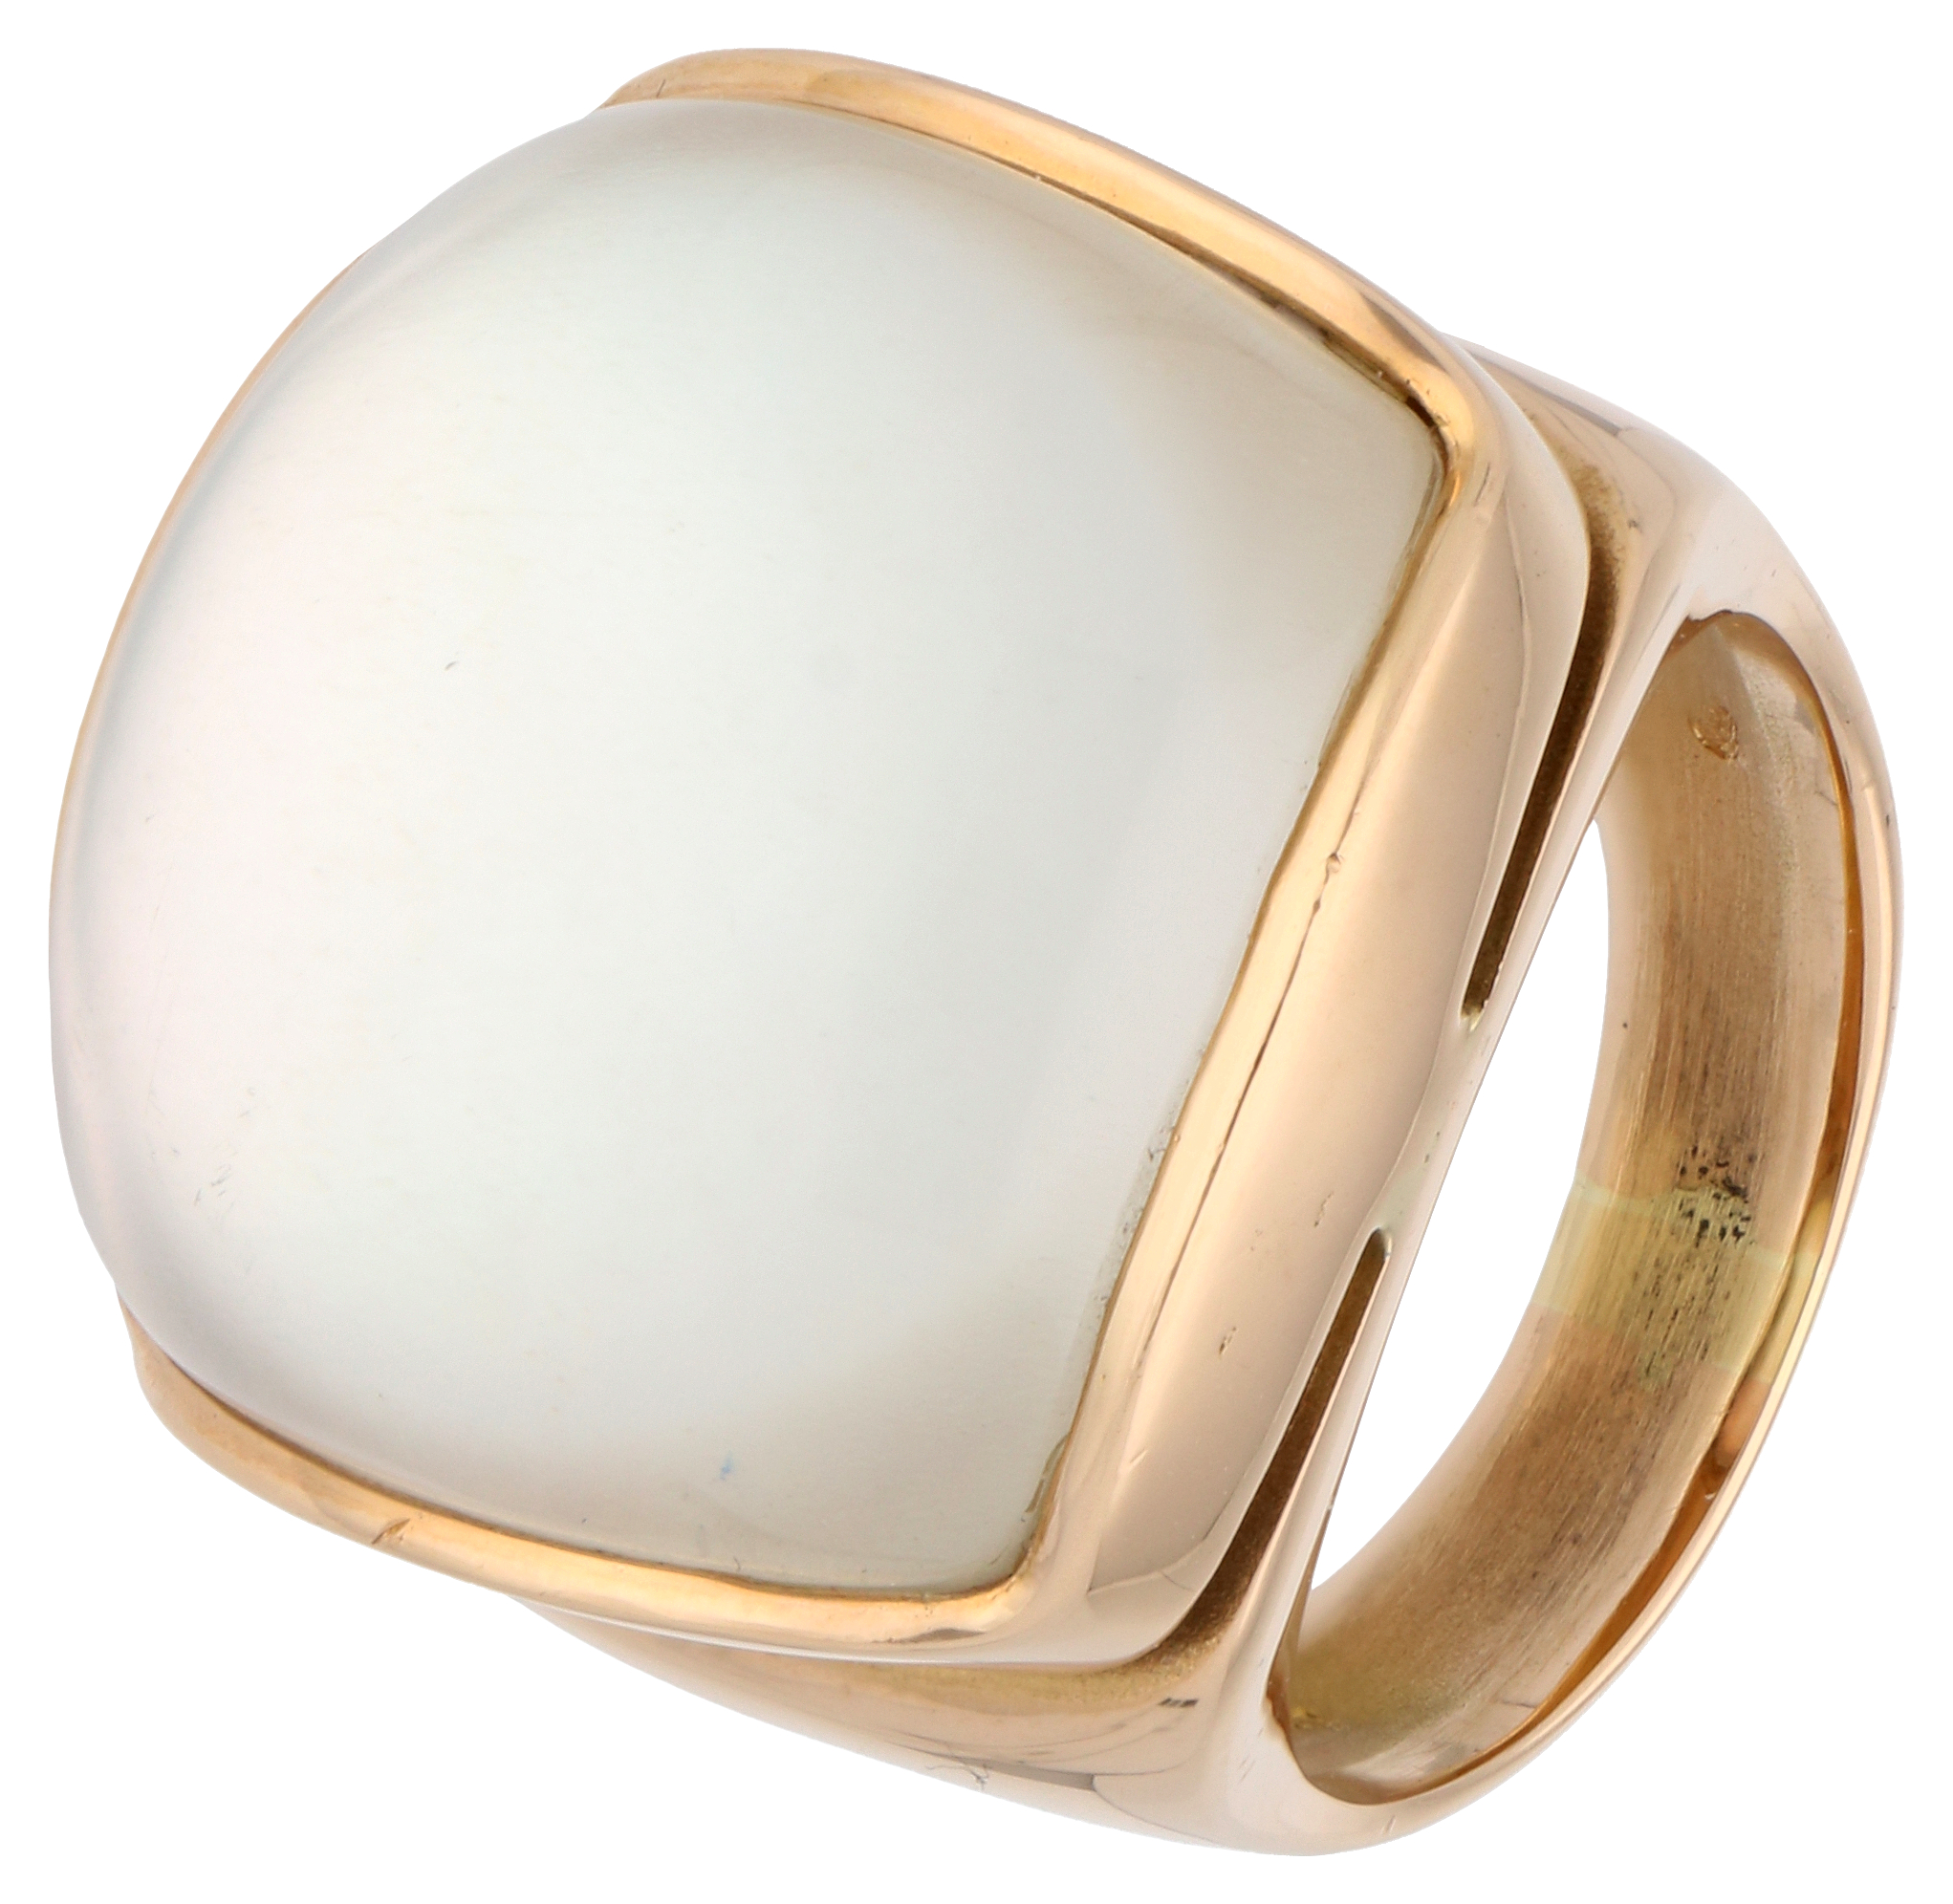 No Reserve - 18k evaNueva yellow gold ring set with mother of pearl and quartz.